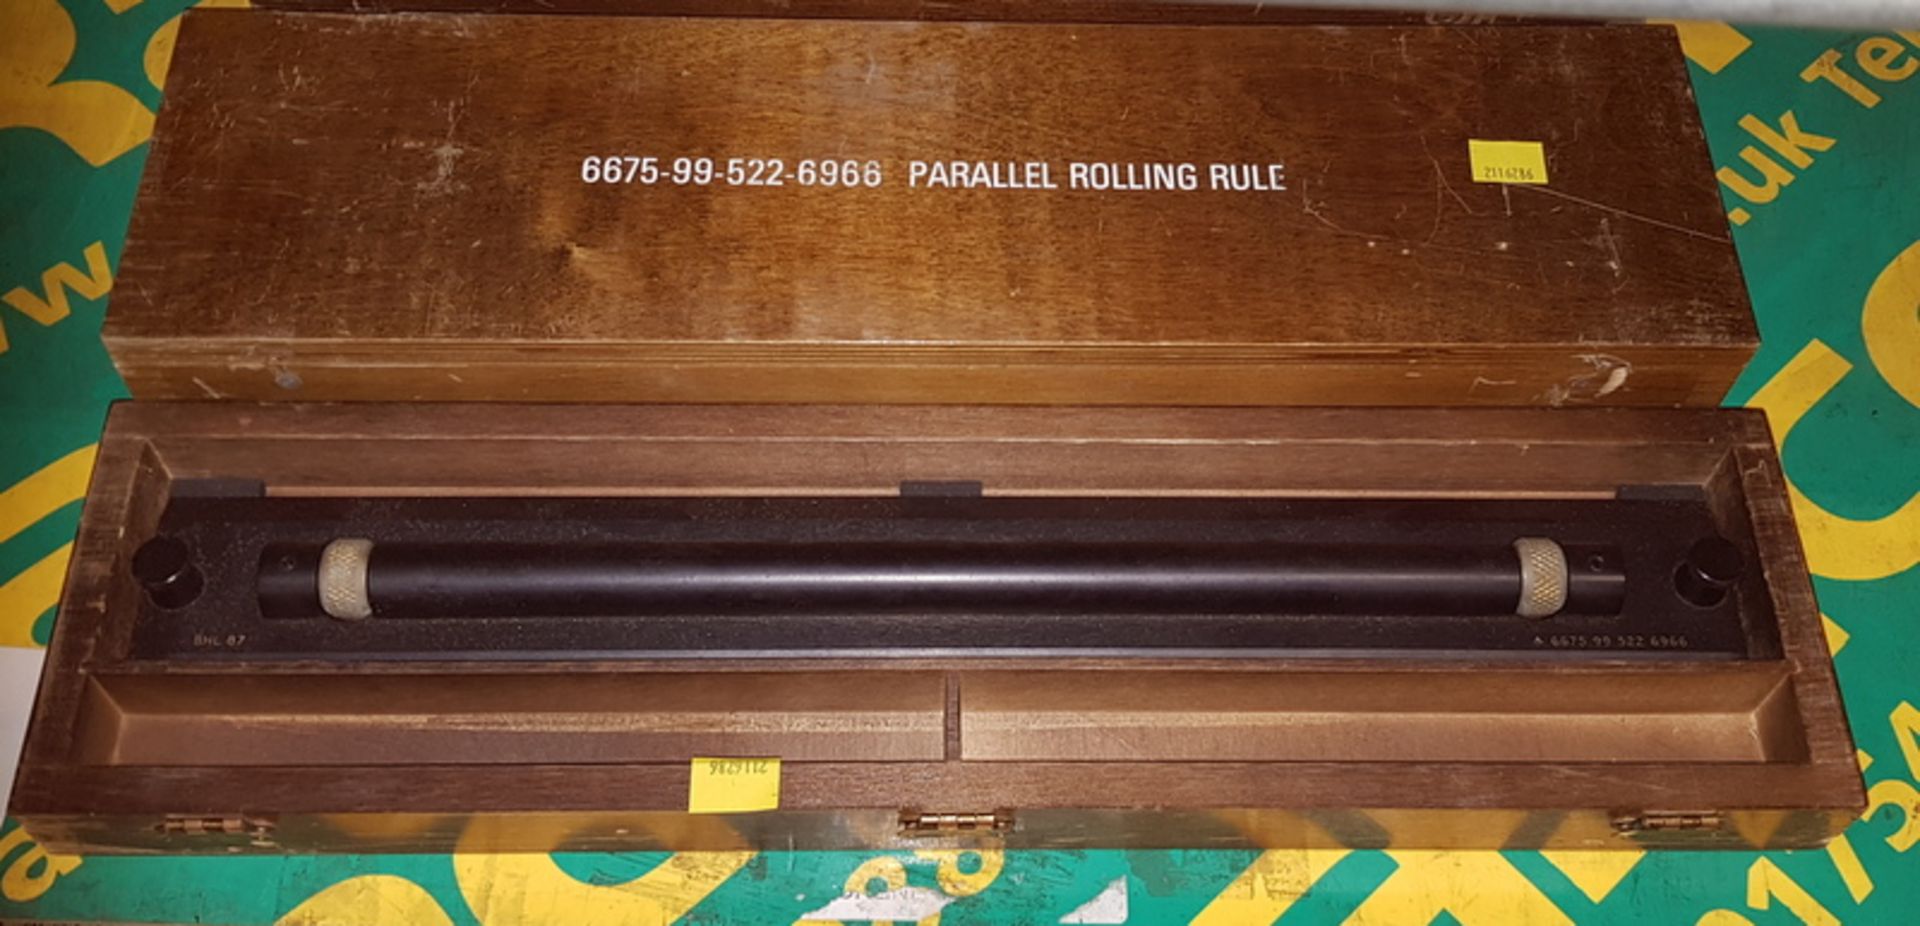 3x Parallel Rolling Rules NSN 6675-99-522-6966 - Image 2 of 2